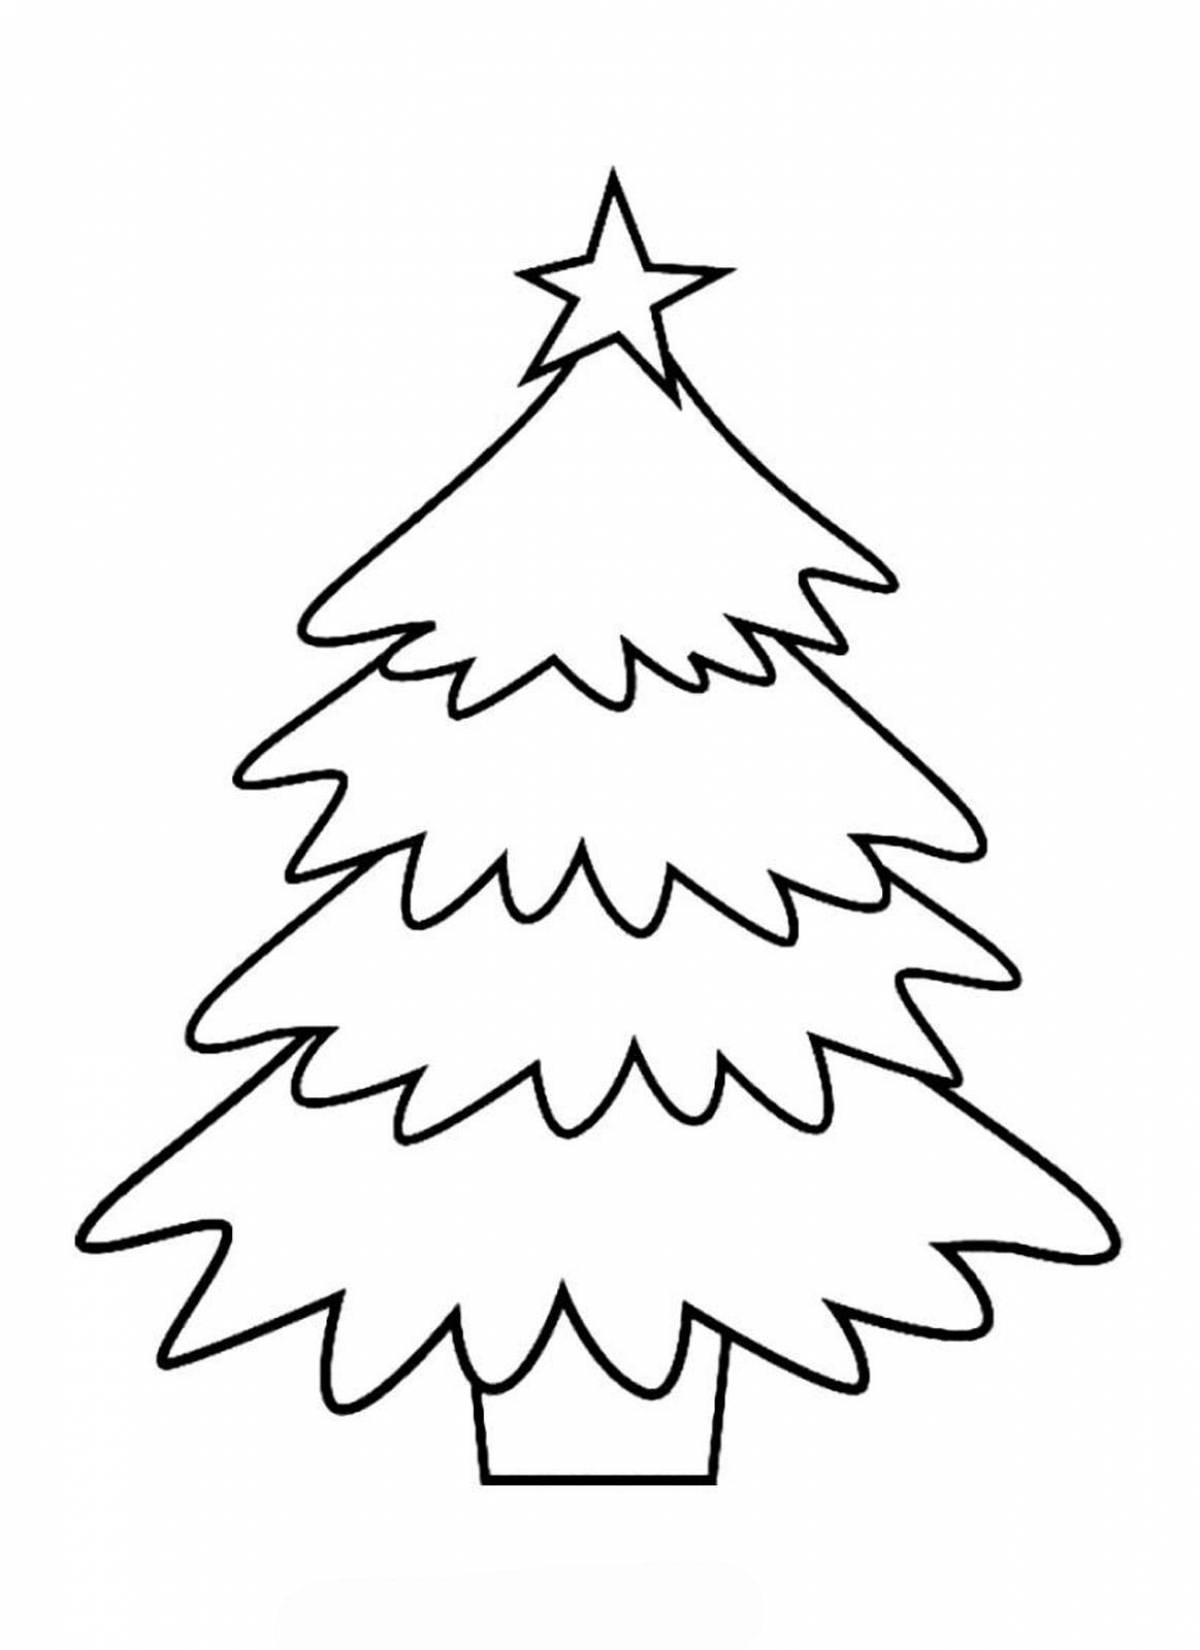 Rampant Christmas tree coloring page for 2-3 year olds